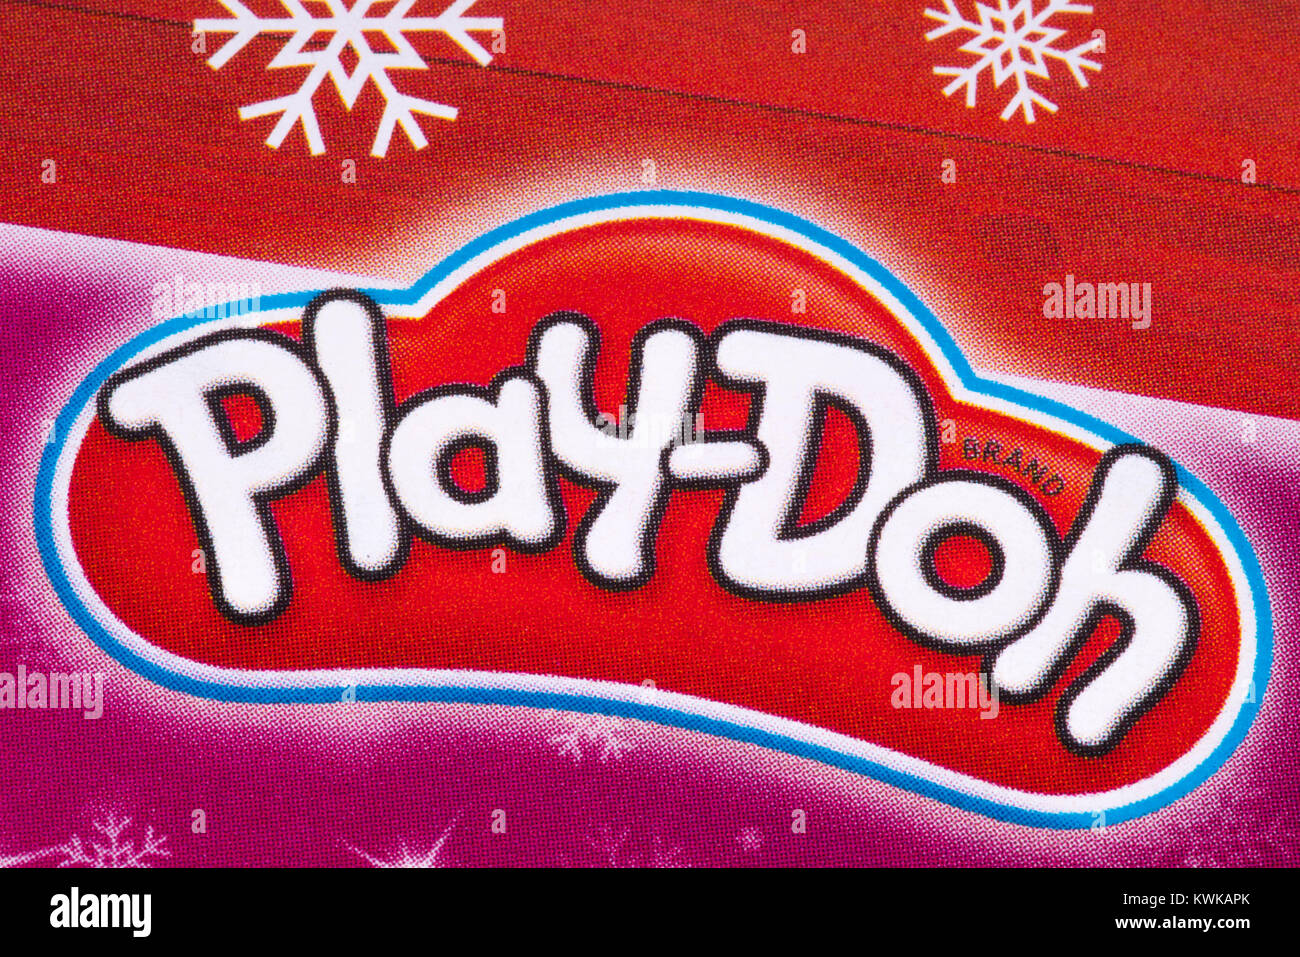 LONDON, UK - DECEMBER 18TH 2017: The Play-Doh logo printed in a Tesco toys catalogue, on 18th December 2017.  The Play-Doh brand is owned and manufact Stock Photo